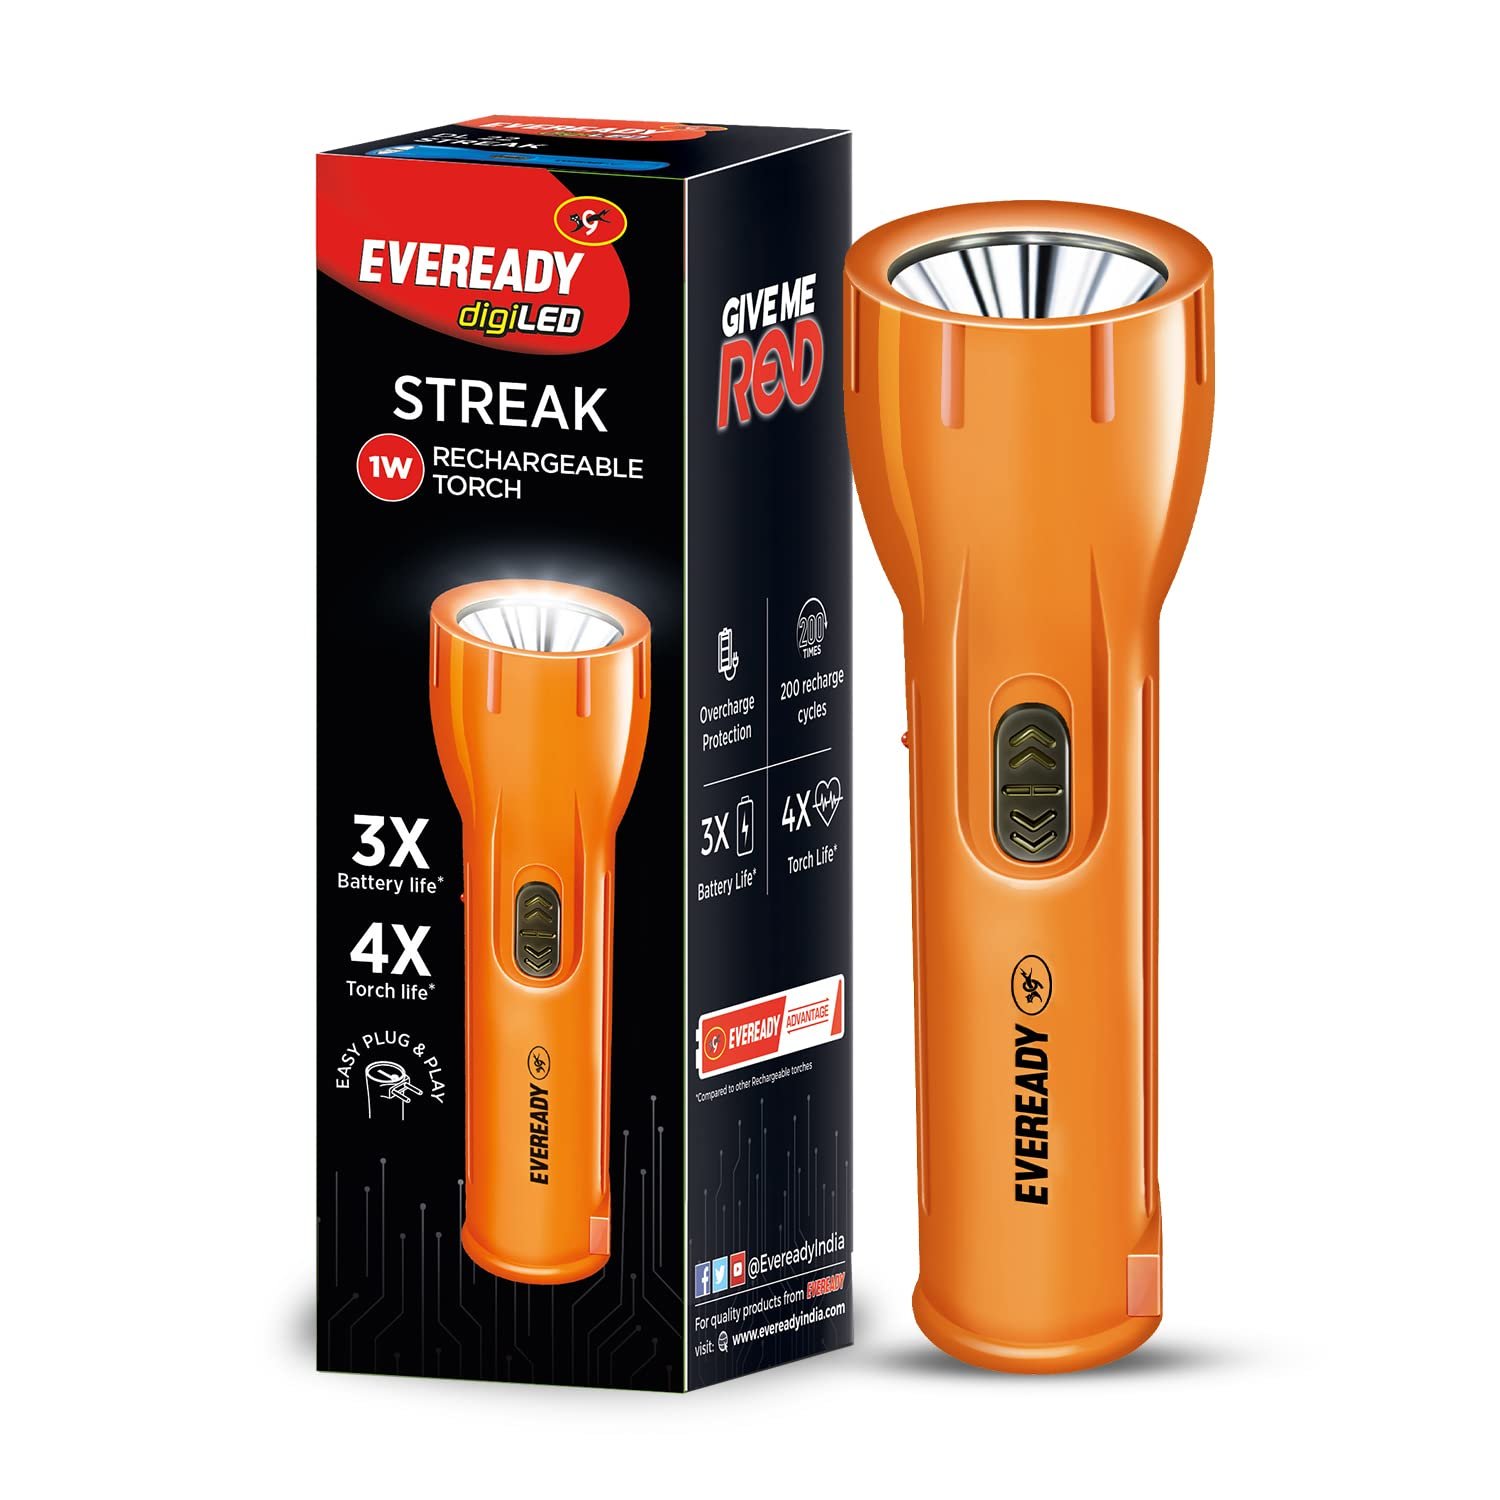 Eveready DIGILED DL22 Rechargeable Torch (Color May Vary)